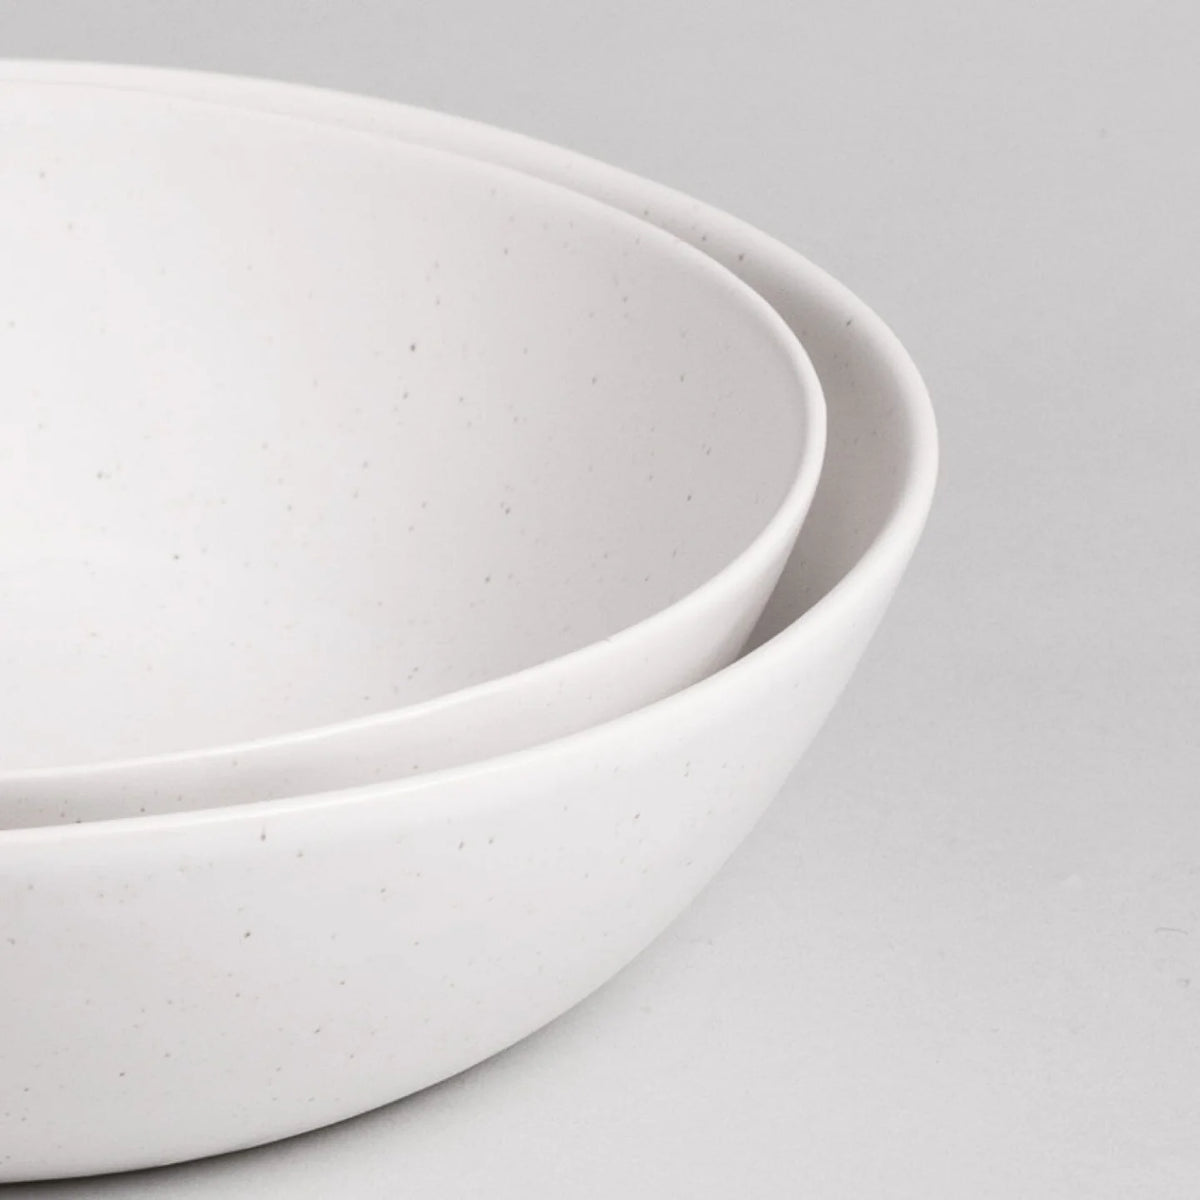 The Low Serving Bowls